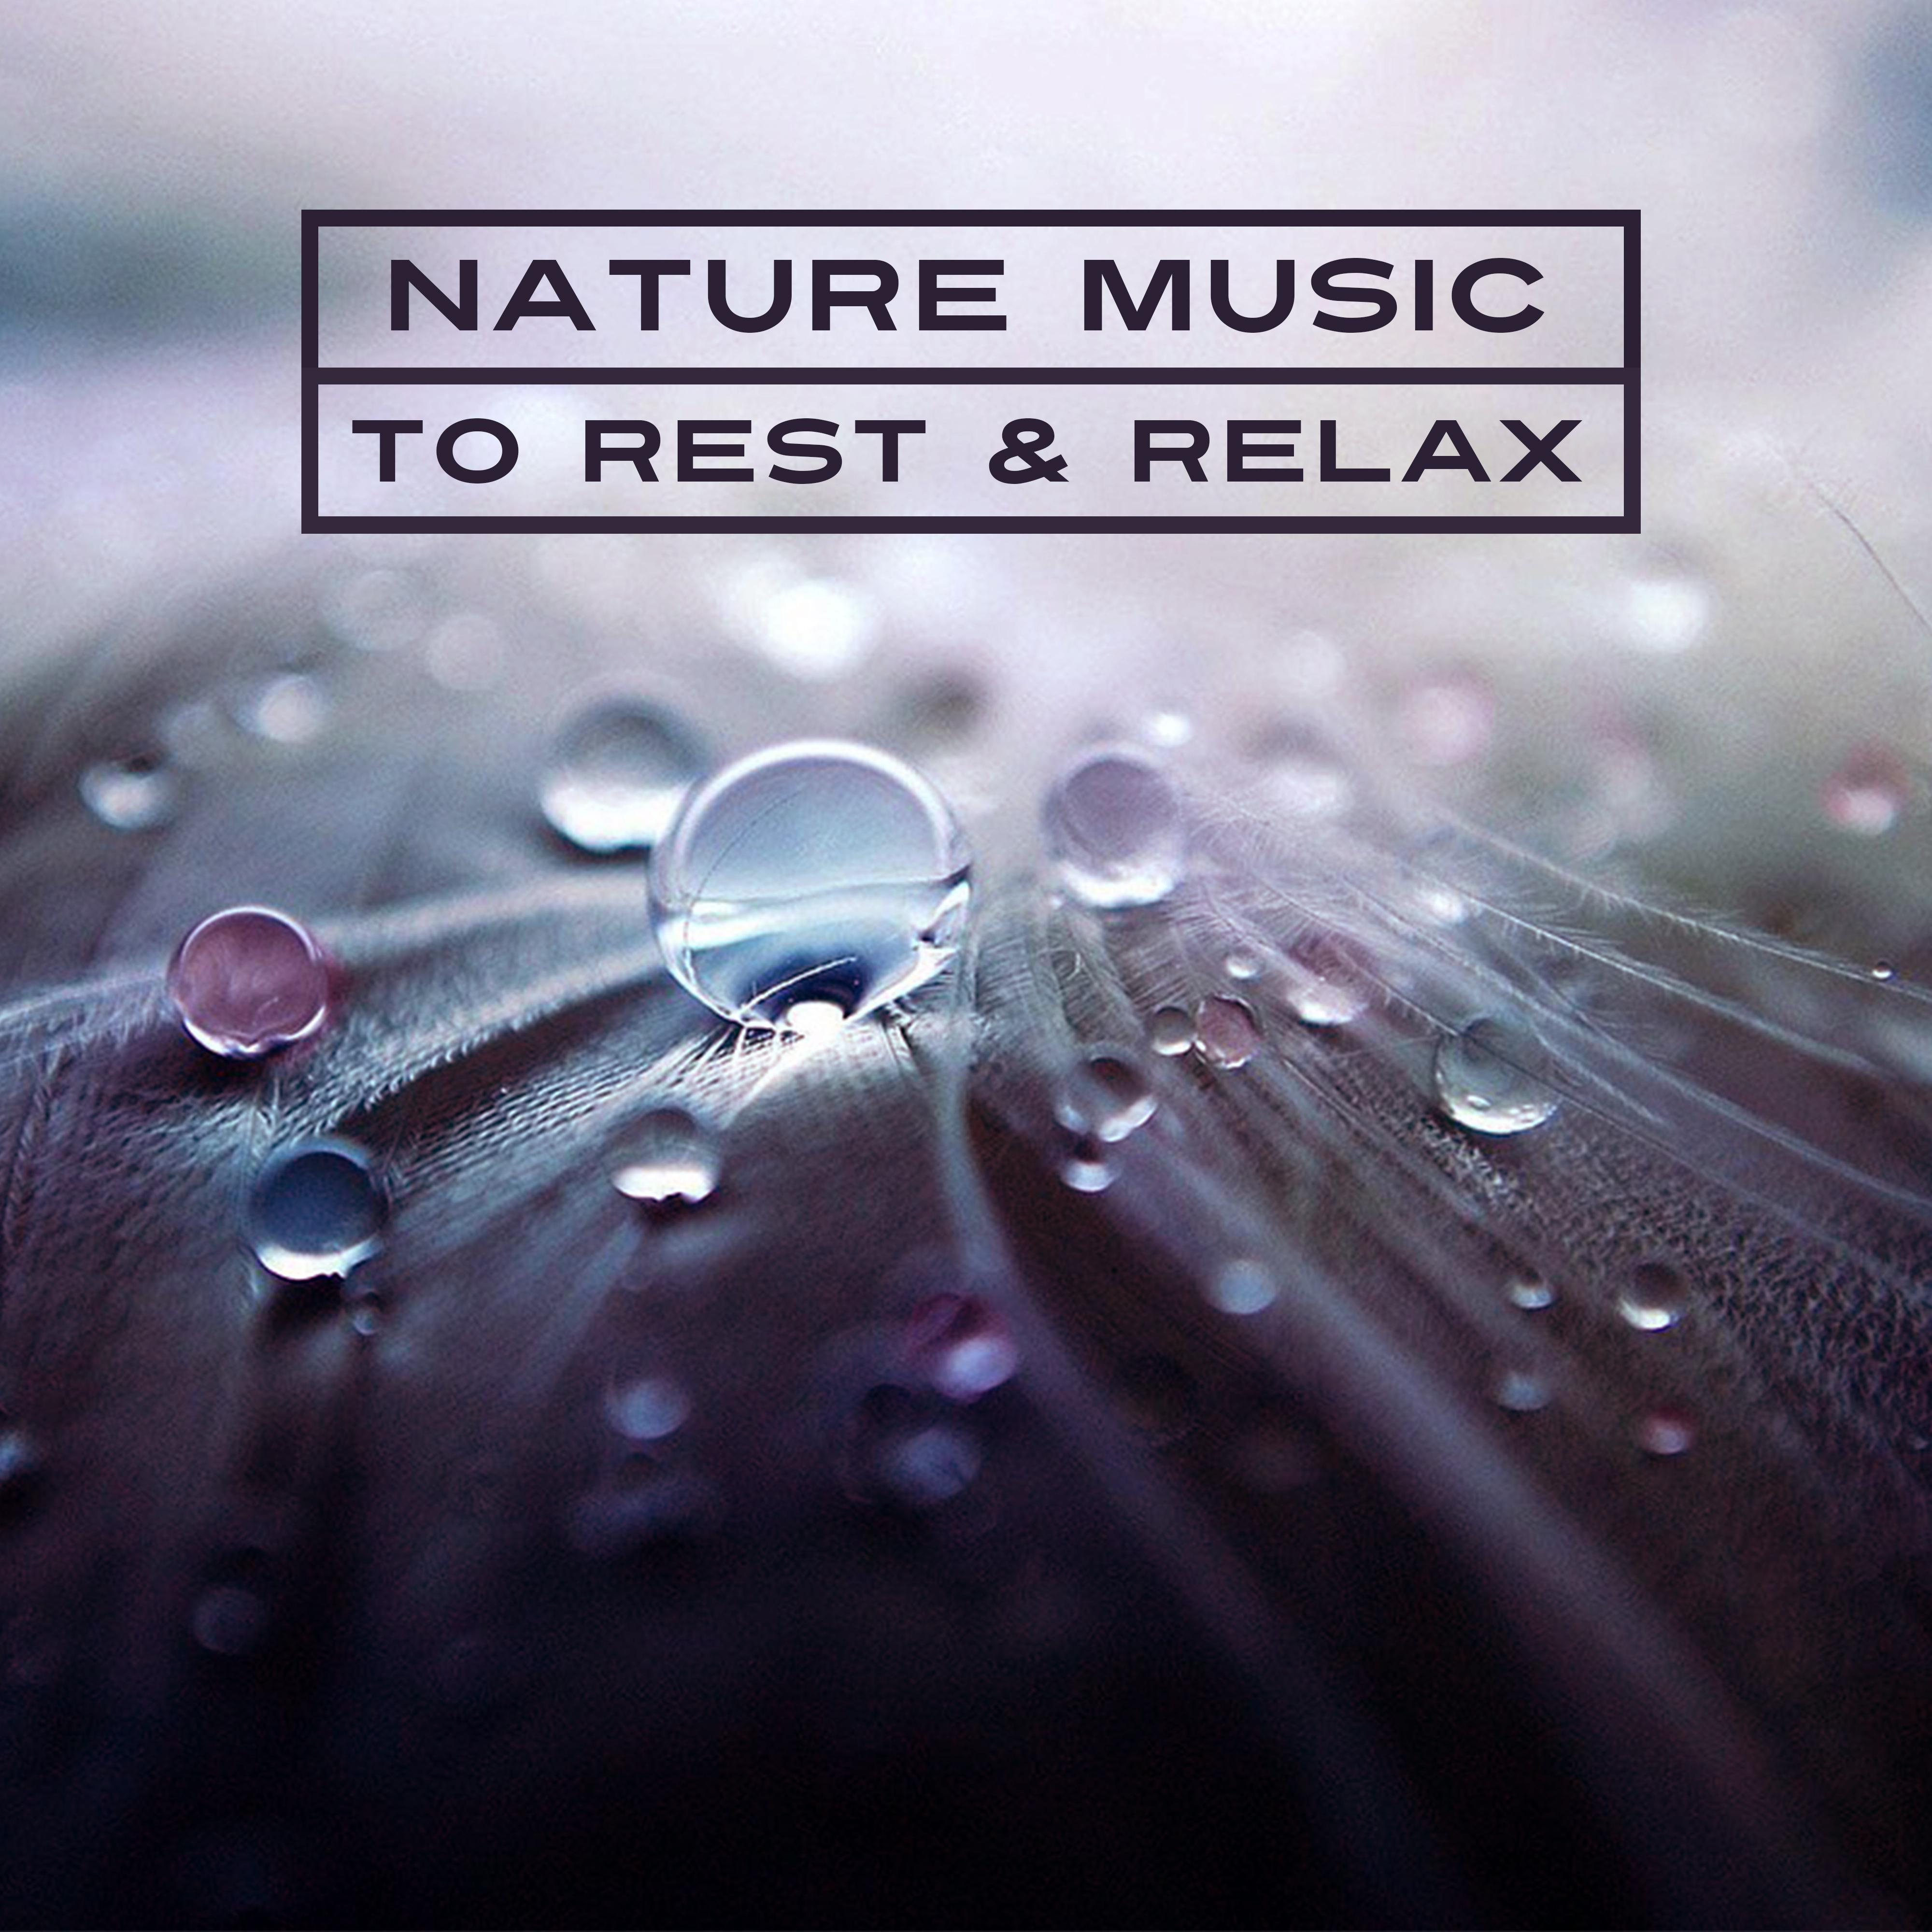 Nature Music to Rest & Relax – New Age Music, Sounds of Nature, Calm Waves, Healing Therapy